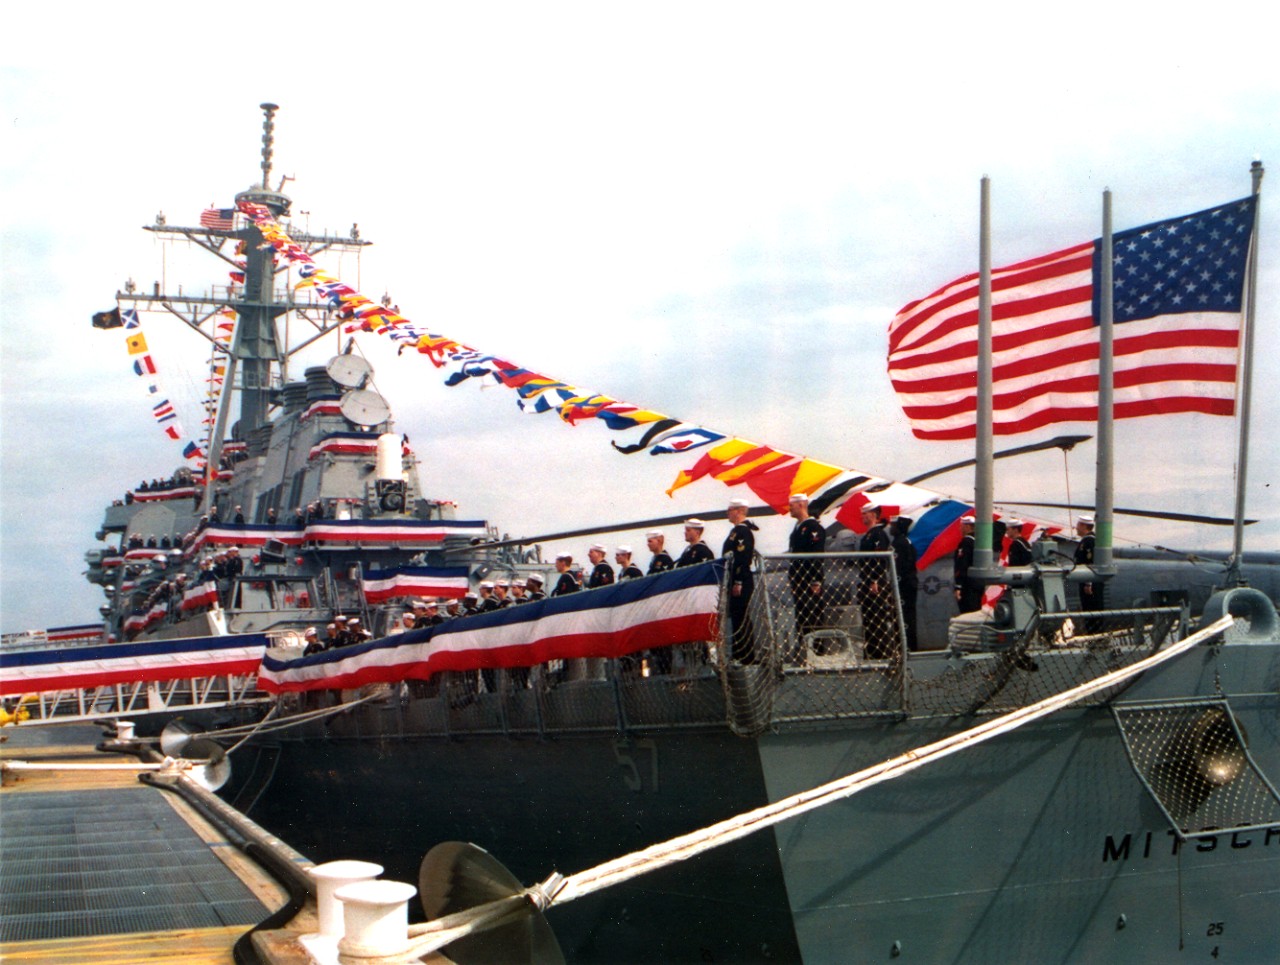 Collection of 37 color photographs related to the commissioning and decommissioning ceremonies of the following ships- decommissioning: USS Saratoga (CV-60) August 20, 1994, USS Dale (CG-19), September 22, 1994. Commissioning: USS Mitscher (DDG-57), December 10, 1994, USS Callaghan (DDG-994), August 29, 1981, USS Typhoon (PC-5), and February 12, 1994. Photos include views of the ship, crew, manning the rails, & speeches. The photographs were taken by the donor. 